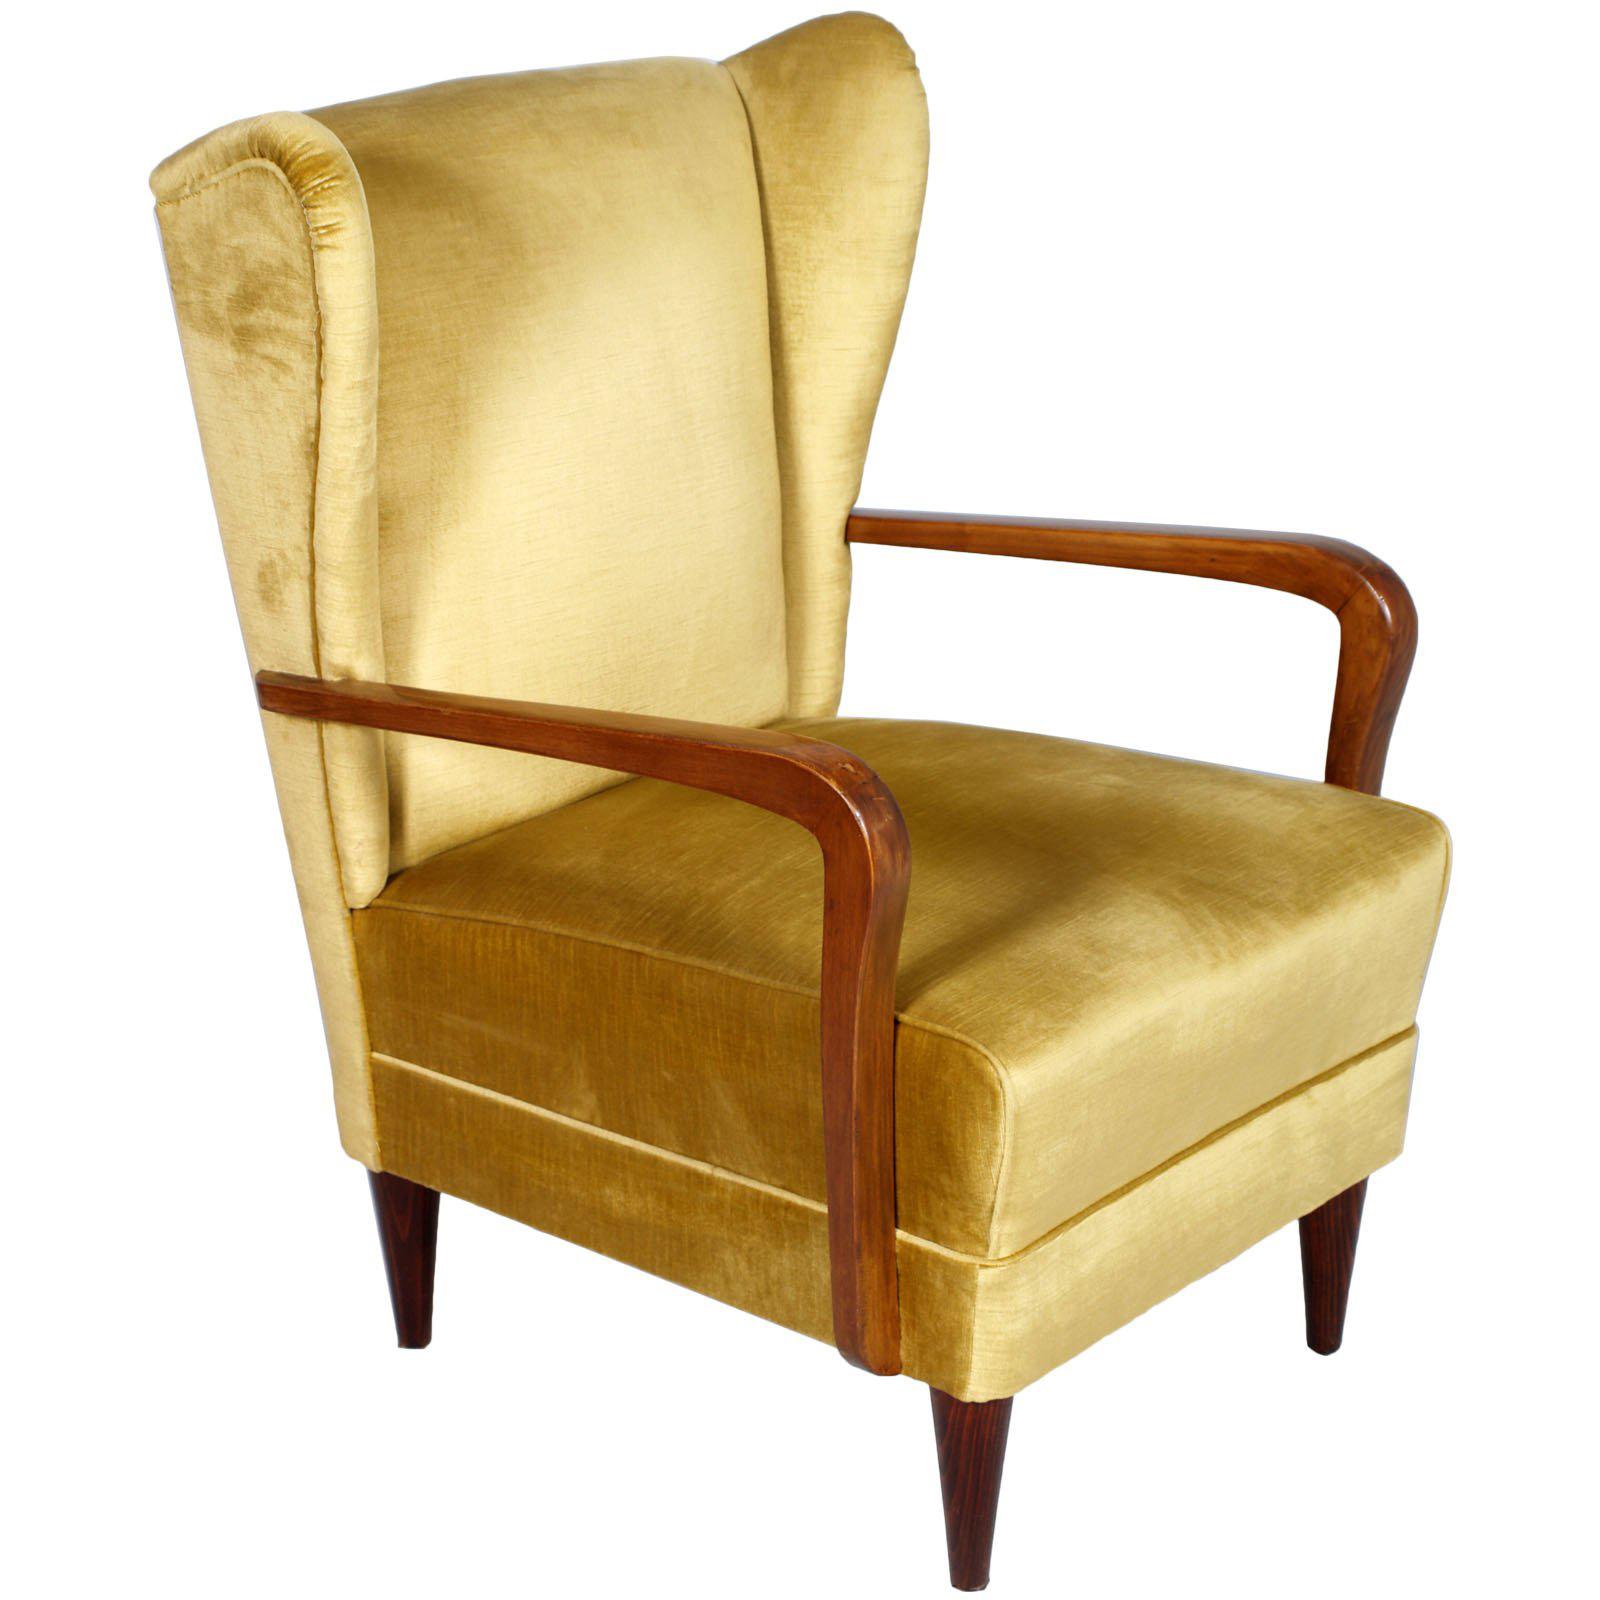 Majestic Gio Ponti late 1930s vintage Italian pair high back armchairs with original gold yellow velvet. Exceptional conditions of the upholstery and walnut structure
Gio Ponti attributed.

Measures cm: H 108/48, W 69, D 85.